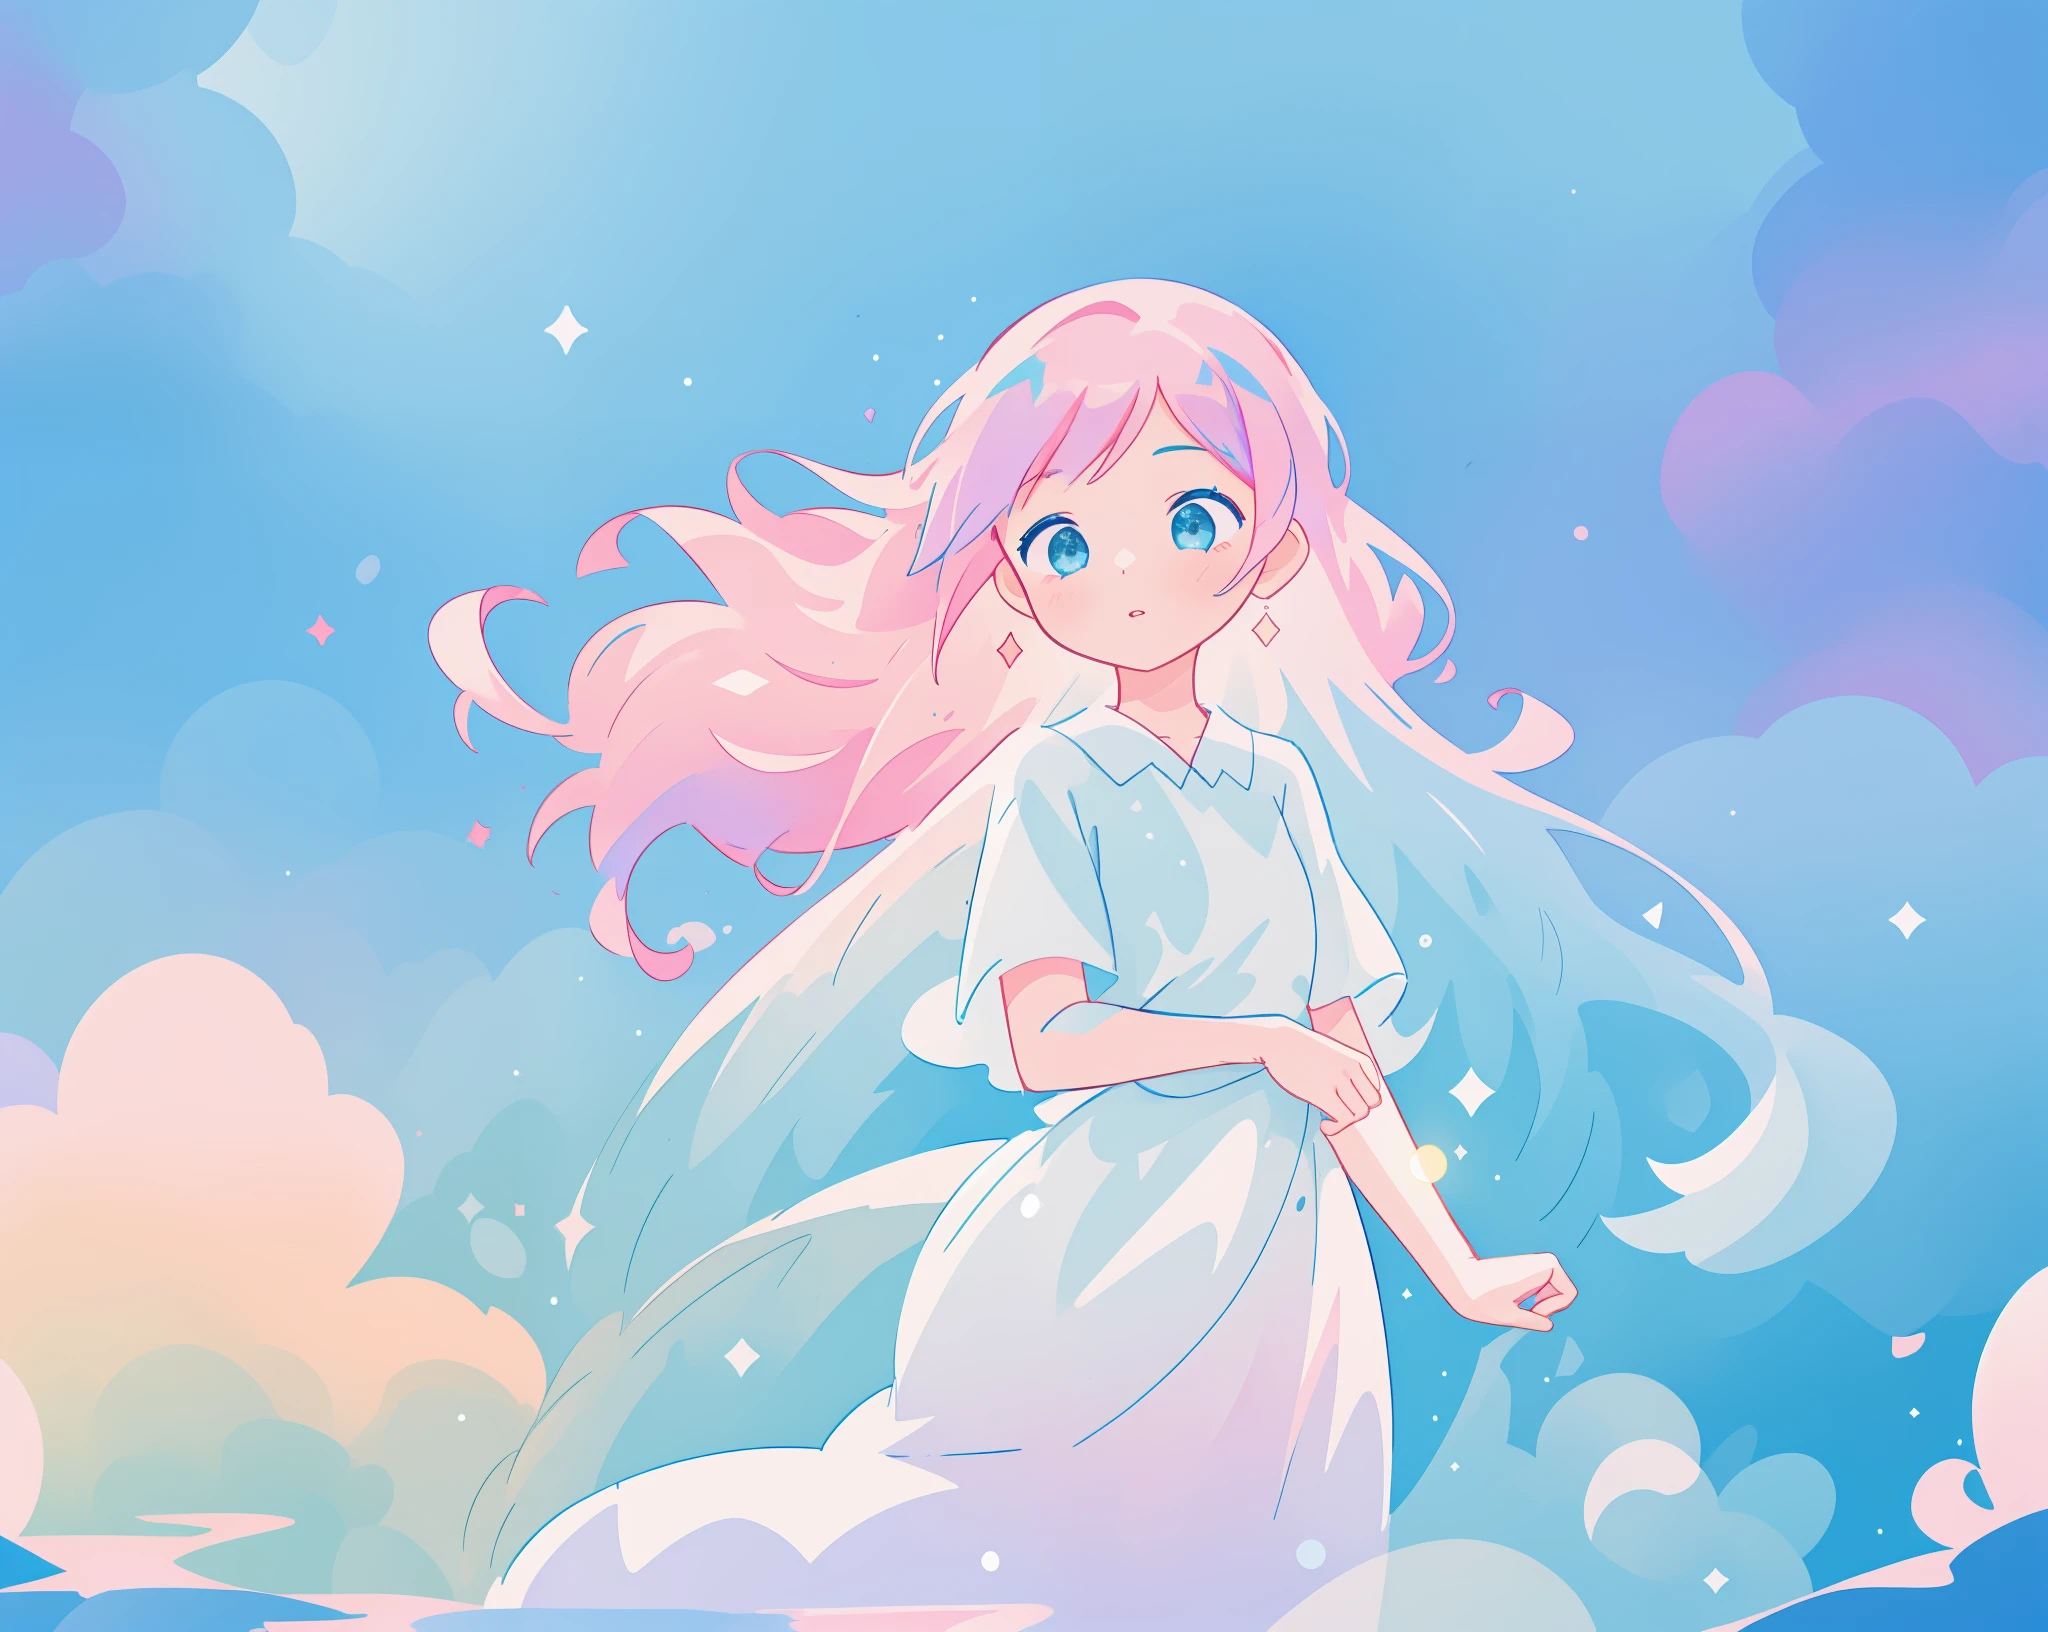 beautiful girl in flowing white dress, vibrant pastel colors, (colorful), magical lights, long flowing colorful pink hair, otherworldly aqua and blue landscape background, inspired by Glen Keane, inspired by Lois van Baarle, disney art style, by Lois van Baarle, glowing aura around her, by Glen Keane, jen bartel, glowing lights! digital painting, flowing glowing hair, glowing flowing hair, beautiful digital illustration, fantasia background, whimsical, magical, fantasy, beautiful face, ((masterpiece, best quality)), intricate details, highly detailed, sharp focus, 8k resolution, sparkling detailed eyes, liquid watercolor